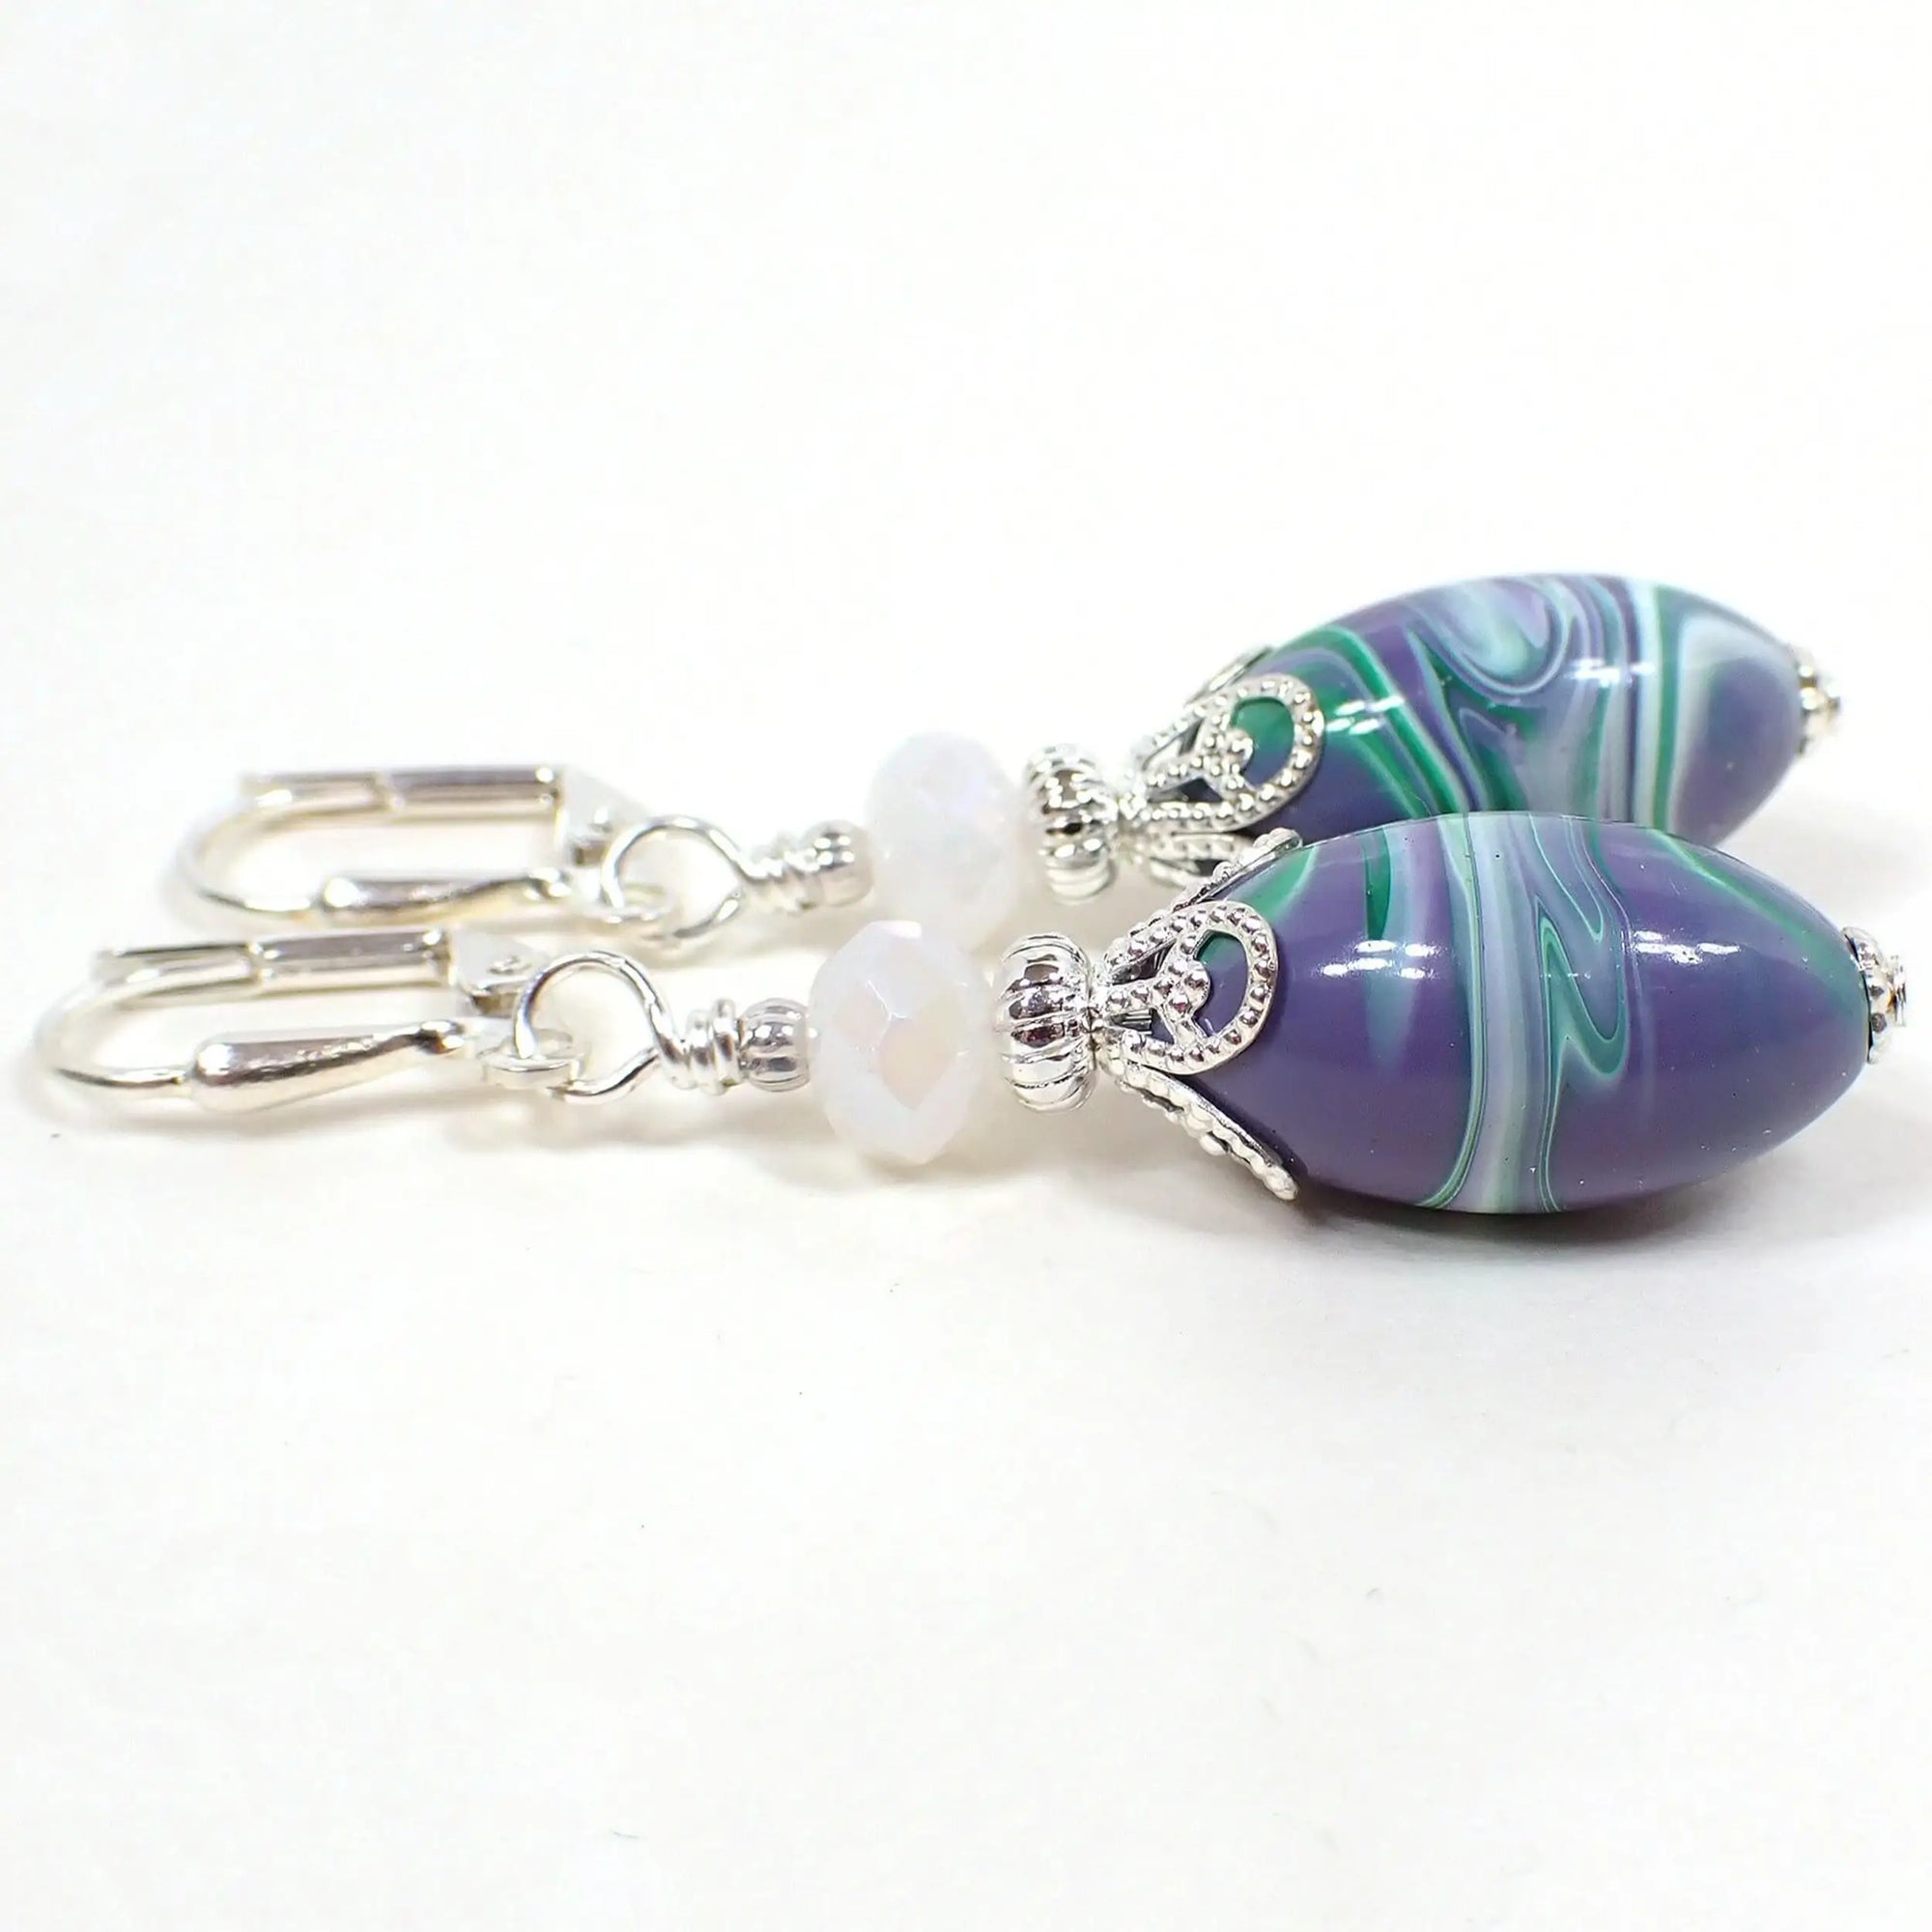 Side view of the handmade earrings with vintage lucite beads. The metal is silver plated in color. There are pearly opaque white faceted glass beads at the top. The bottom lucite beads are oval shaped and have marbled swirls of purple, green, and white. Each bottom bead has a different pattern than the other for a unique appearance.